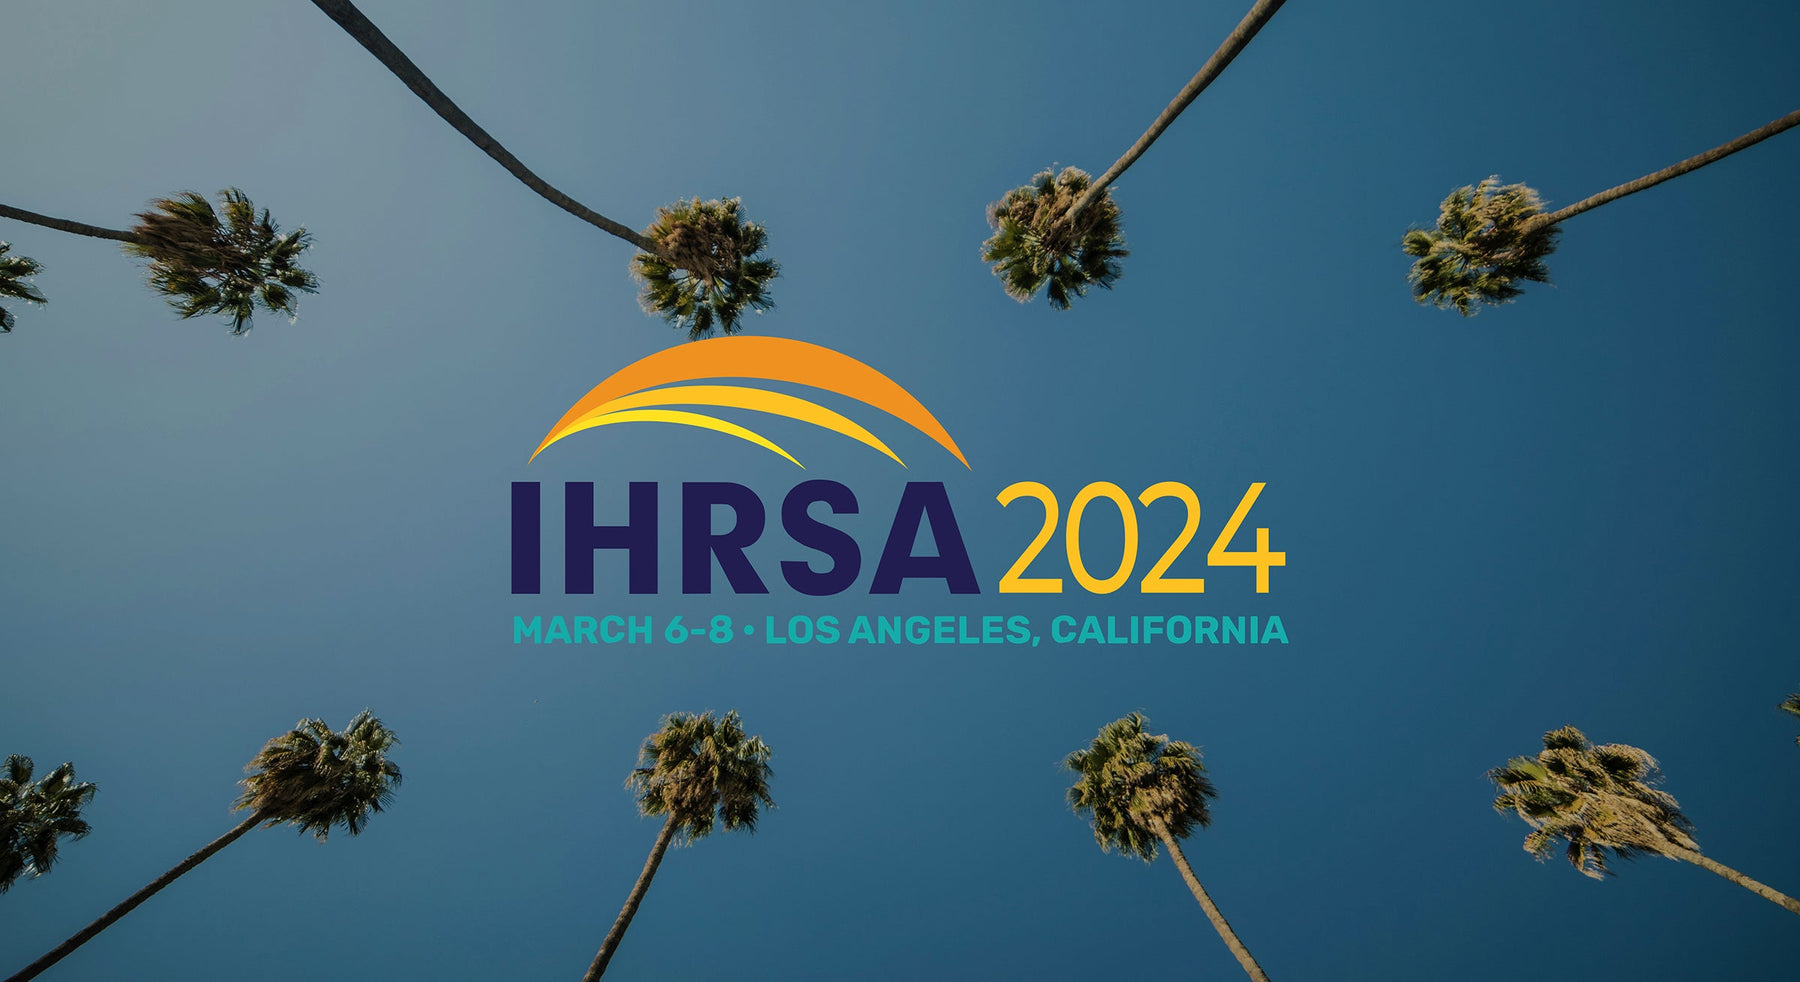 IHRSA 2024 - Get Your Free Pass Here